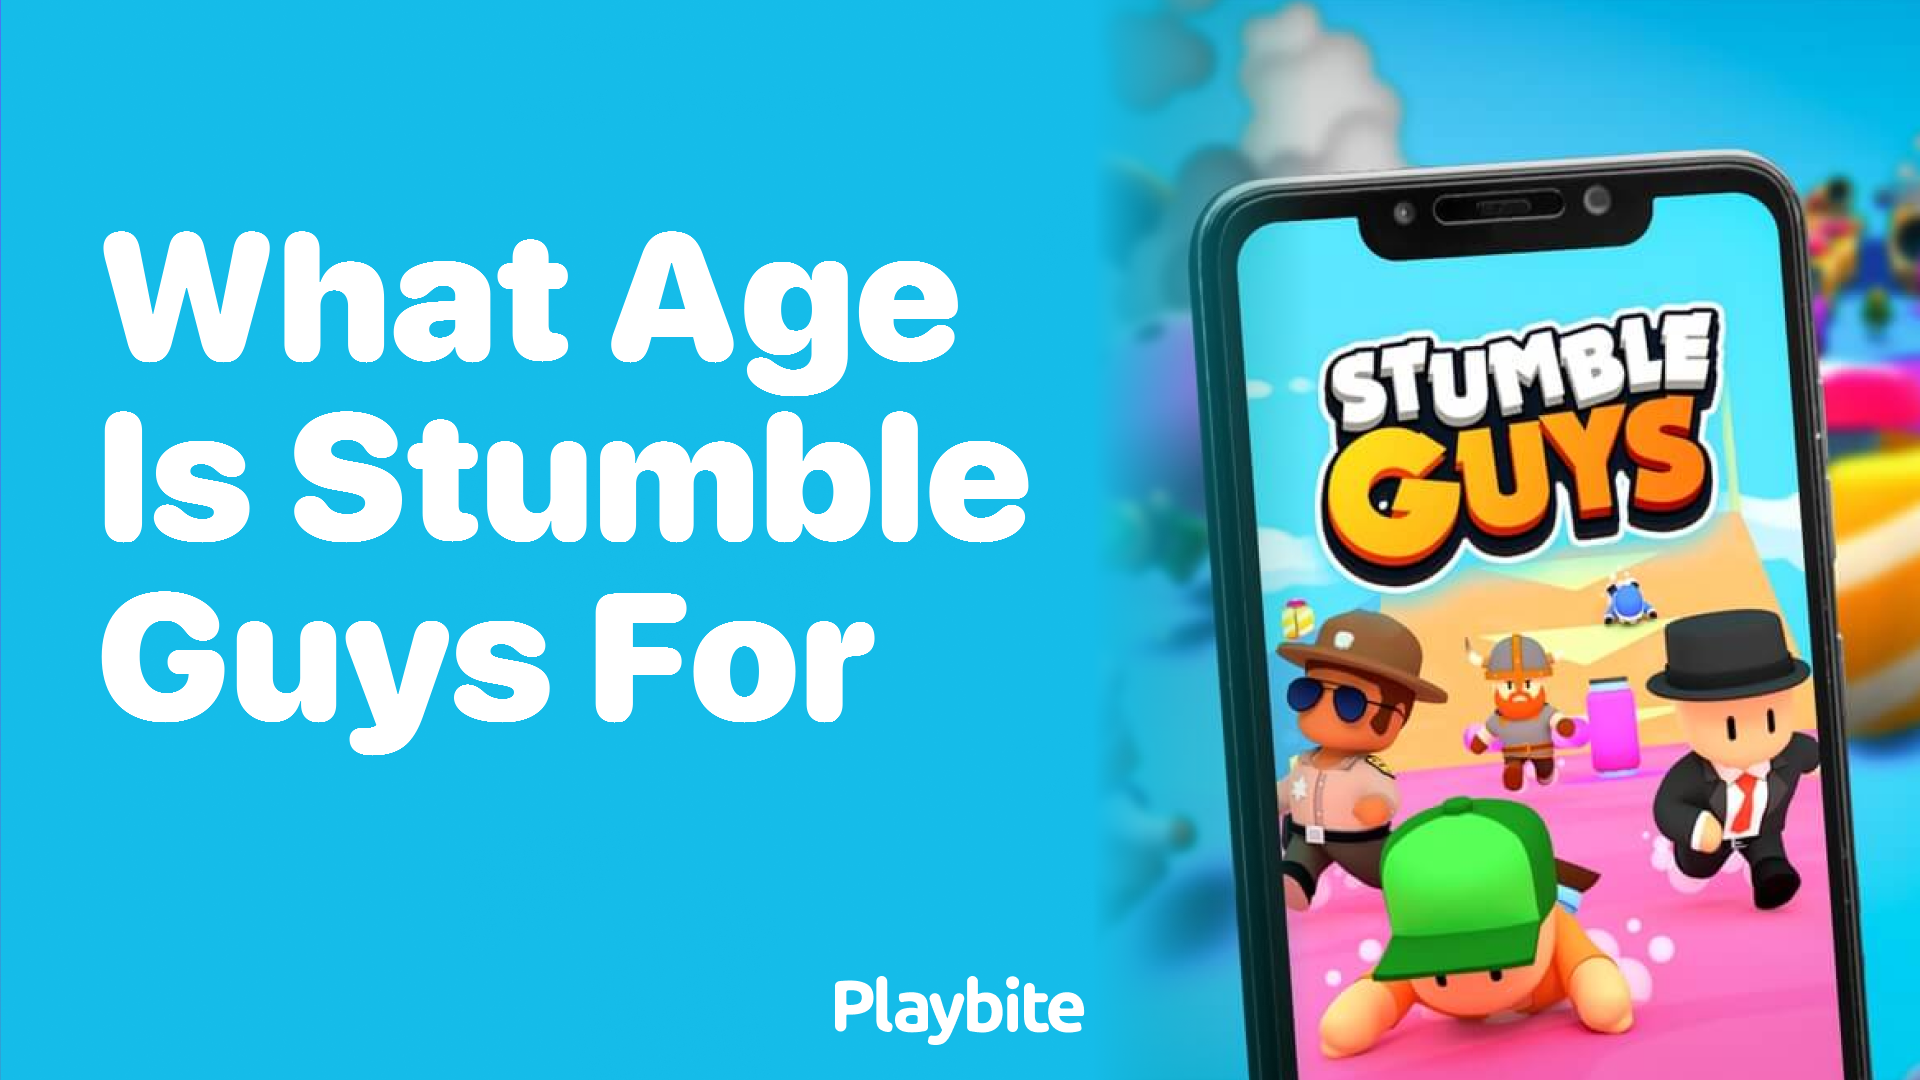 What Age Is Stumble Guys For? Find Out Here!